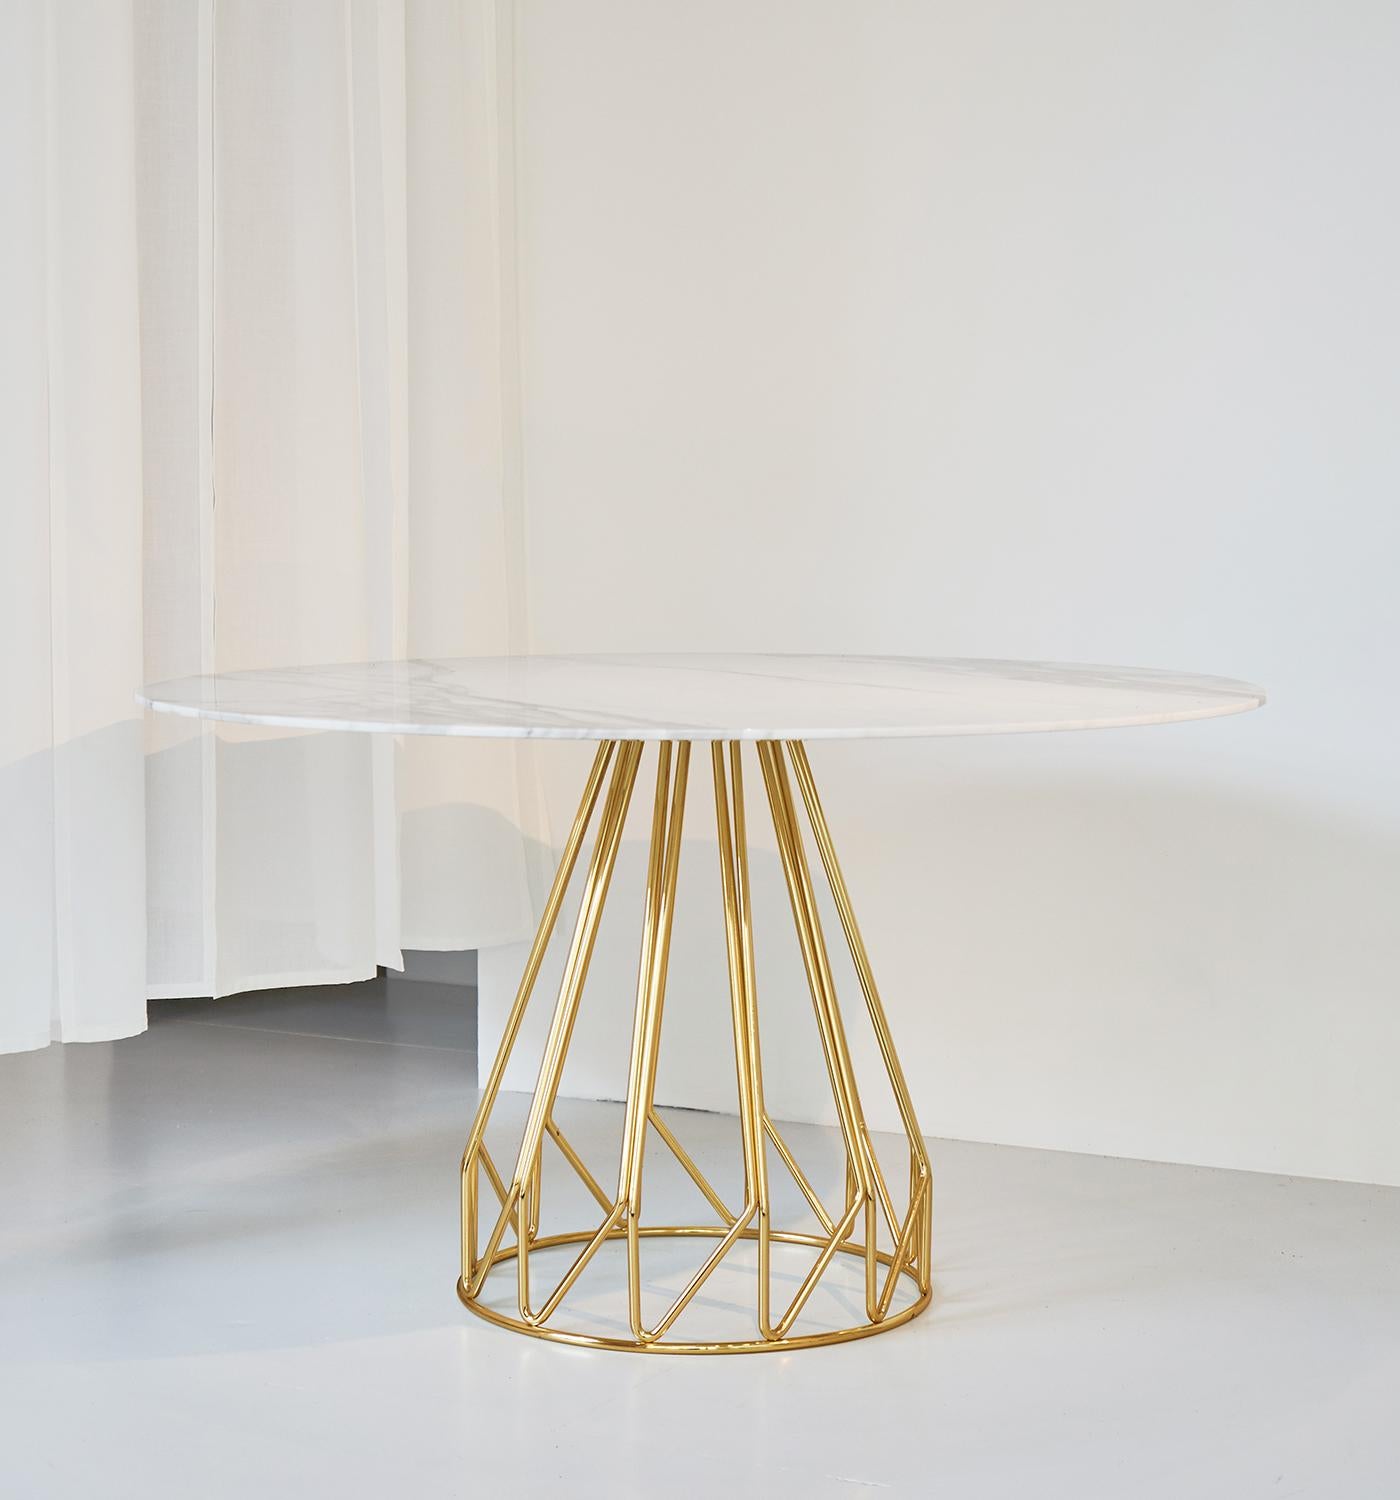 An harmonic sequence of metal wires folded in here, each element is part of a large, light and structured whole whit real Carrara Calacatta marble top diameter of 1300
Madama table is available with many different marble and glass top.
Madama table,